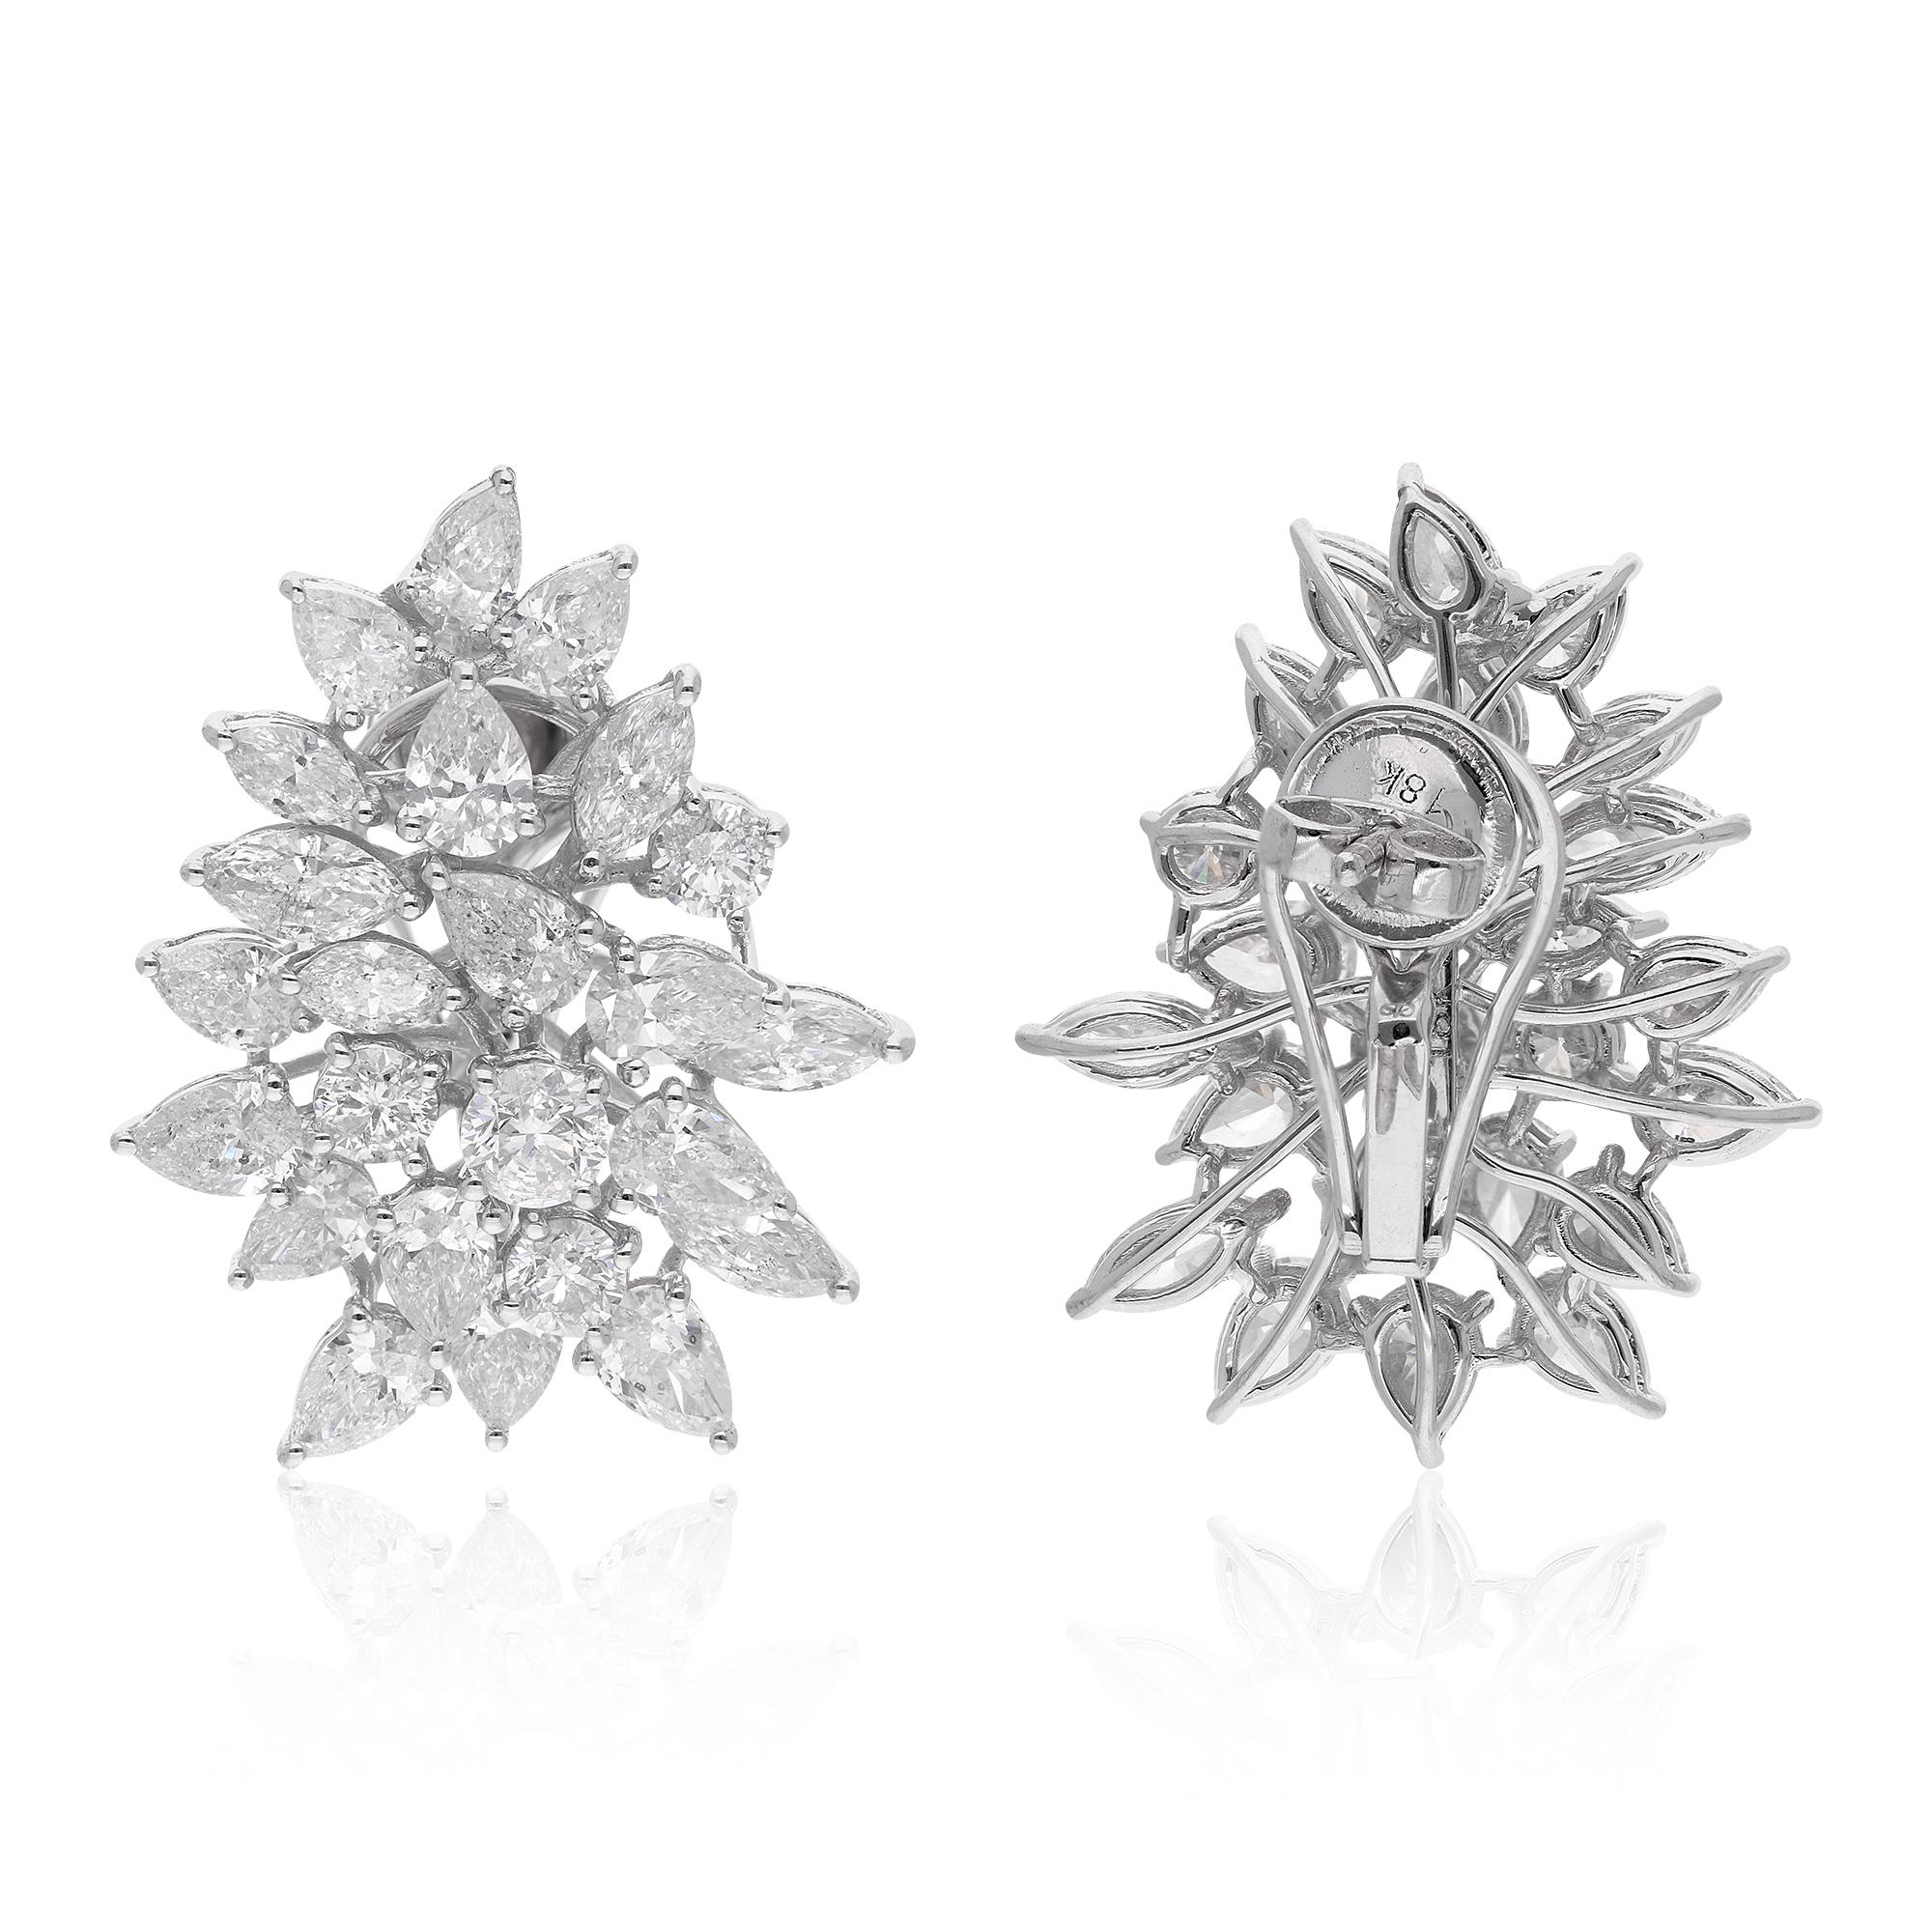 Embrace the epitome of elegance and sophistication with these Natural 9.58 Carat Marquise & Pear Shape Diamond Earrings, meticulously crafted in 18 karat white gold. Each earring boasts a stunning combination of marquise and pear-shaped diamonds,